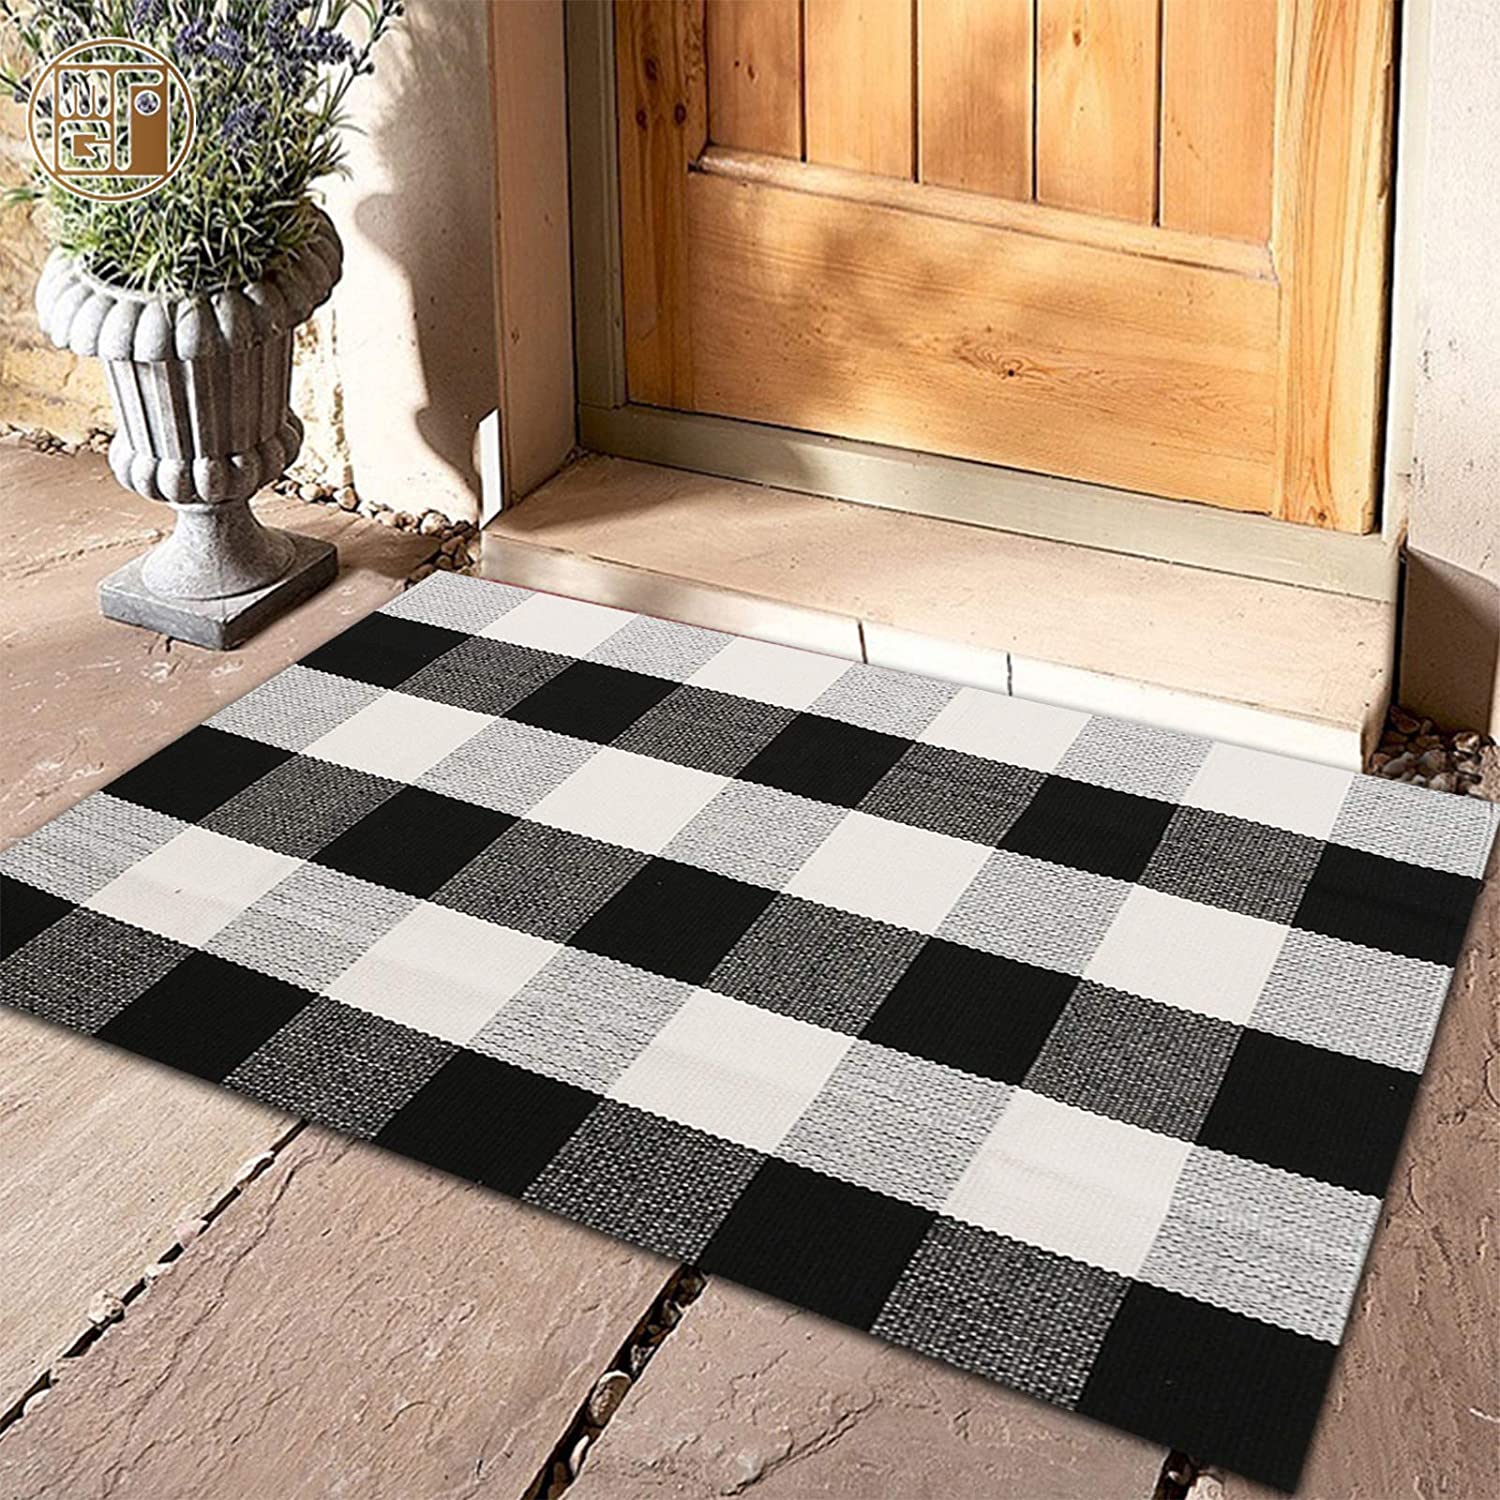 Buffalo Plaid Rug 24 x 36 Inches Black  White Cotton Hand-Made Checkered Door  Mat, Washable Carpet Buffalo check rug for Outdoor/Indoor/Entry Way/Kitchen/Farmhouse 